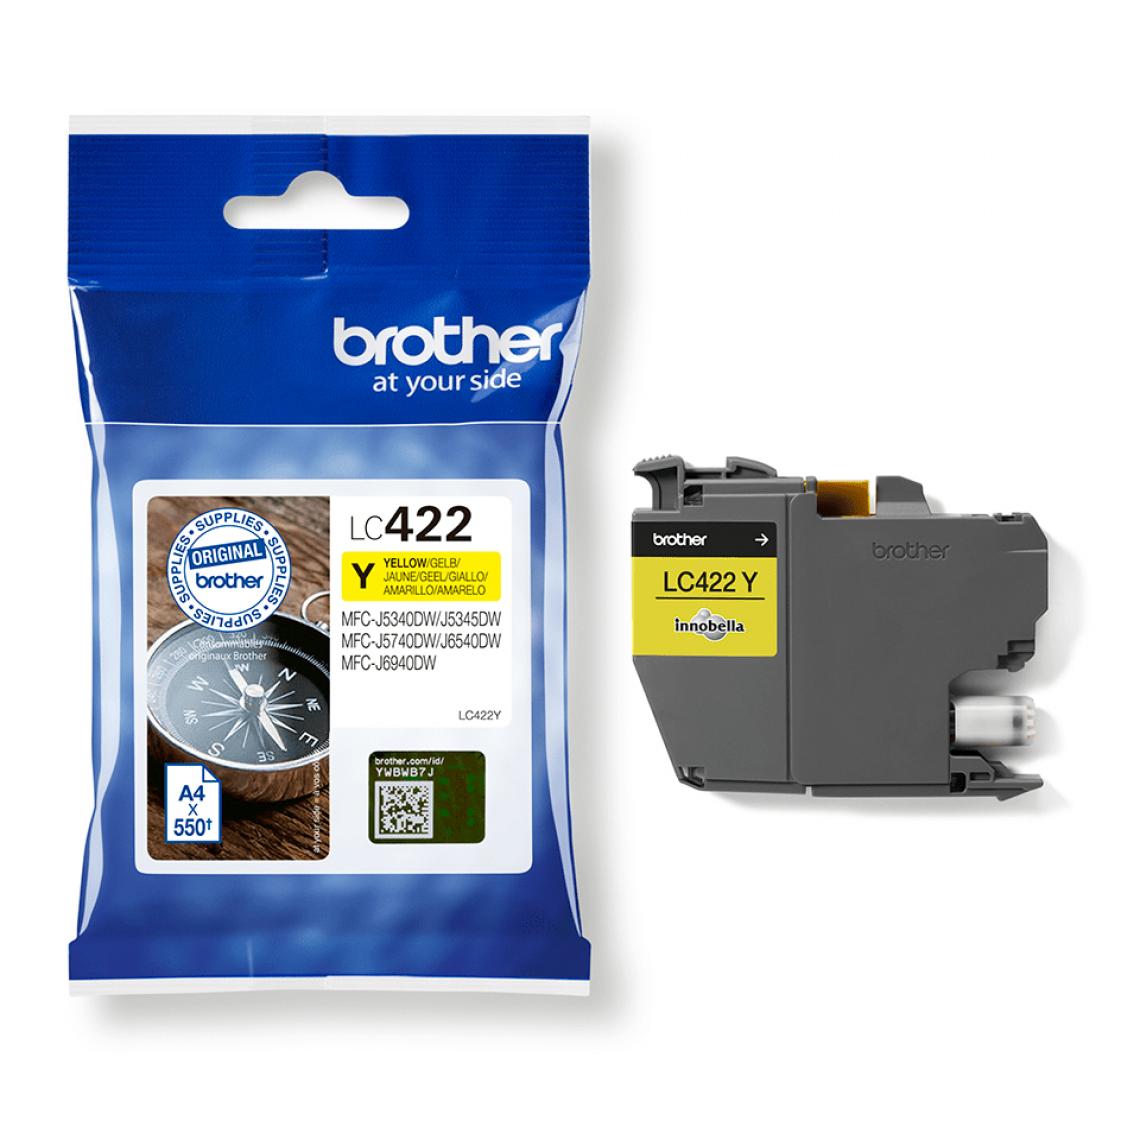 Brother - LC422Y Ink For BH19M/B LC422Y Ink Cartridge For BH19M/B Compatible with MFC-J5340DW MFC-J5740DW MFC-J6540DW MFC-J6940DW 550 pages - Cartouche d'encre